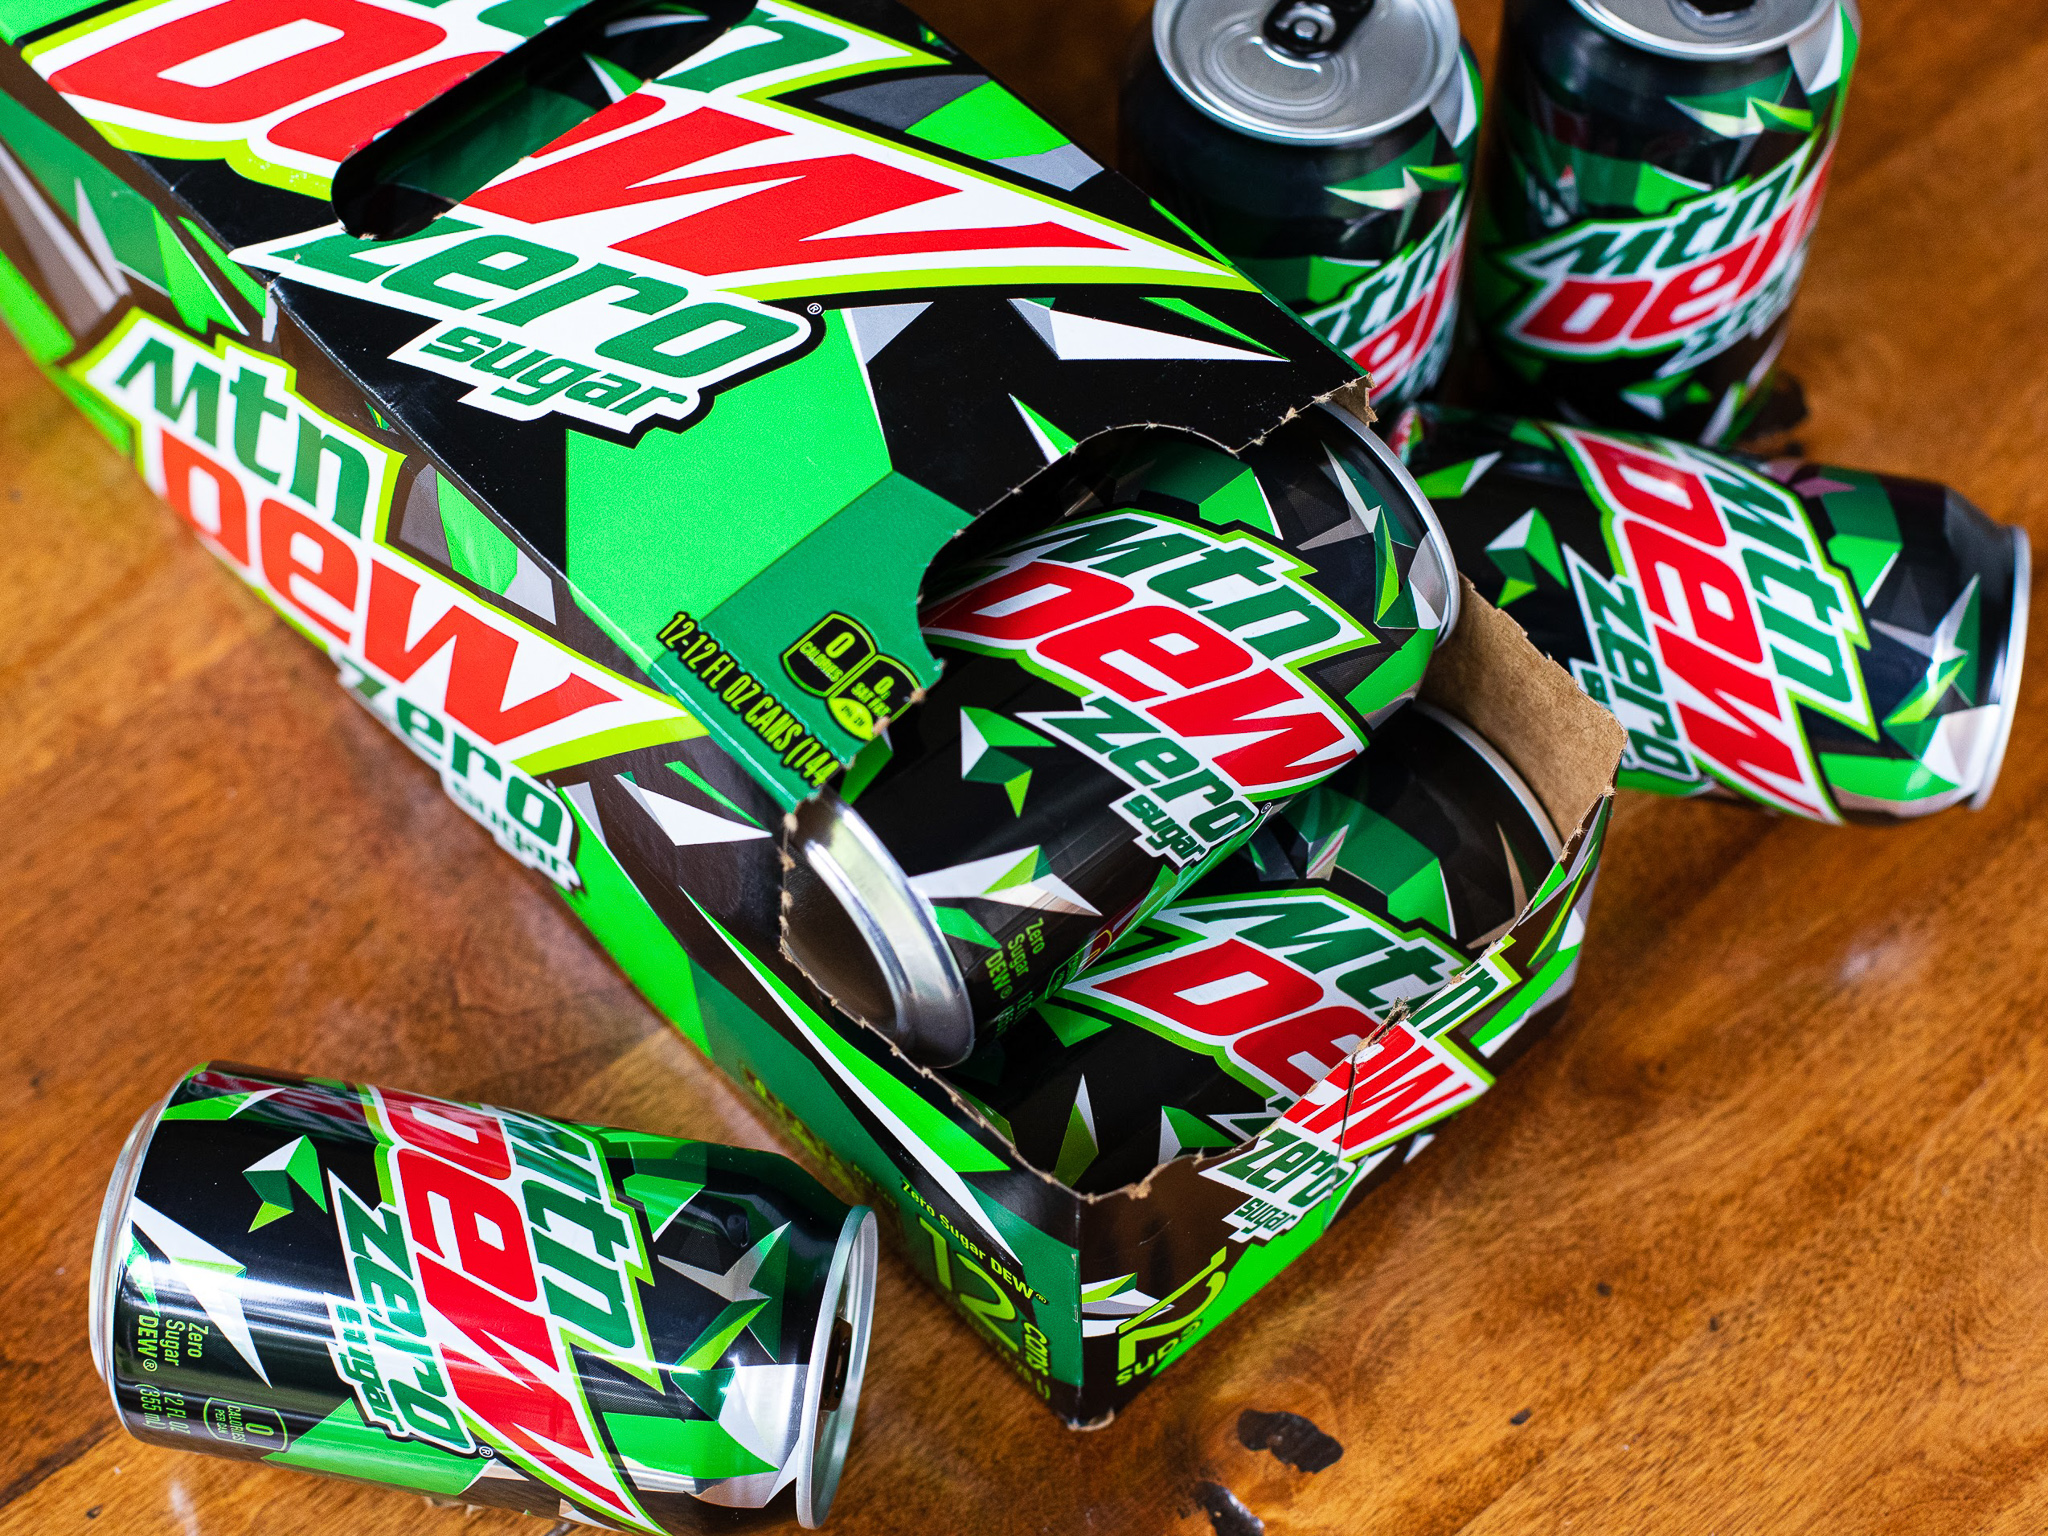 Mtn Dew Zero Sugar 12-Pack As Low As $3.24 At Publix – Less Than Half Price!